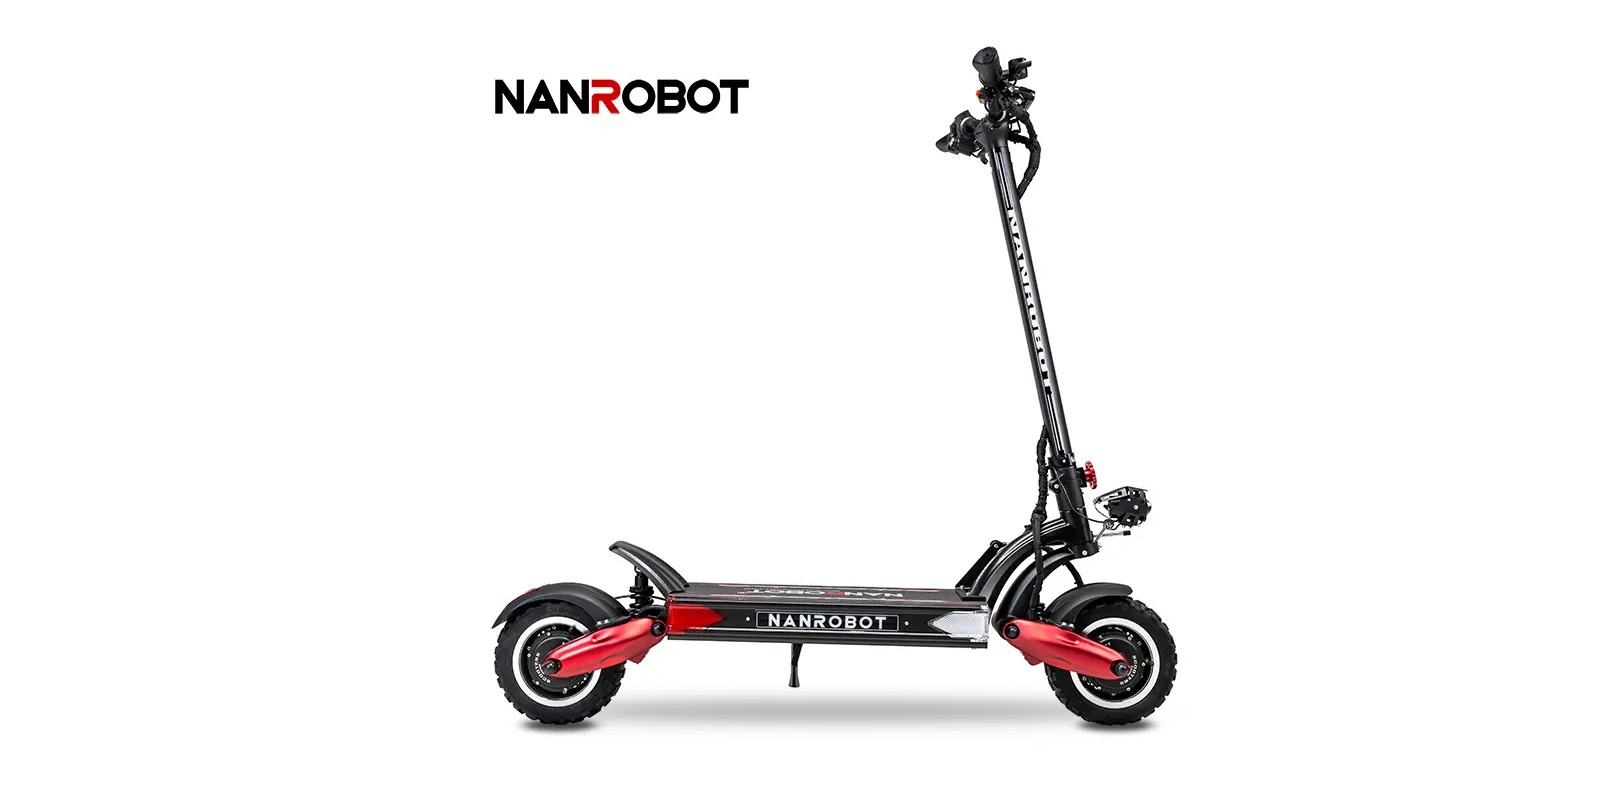 Are Nanrobot Electric Scooters Worth Buying- Let’s Find Out!